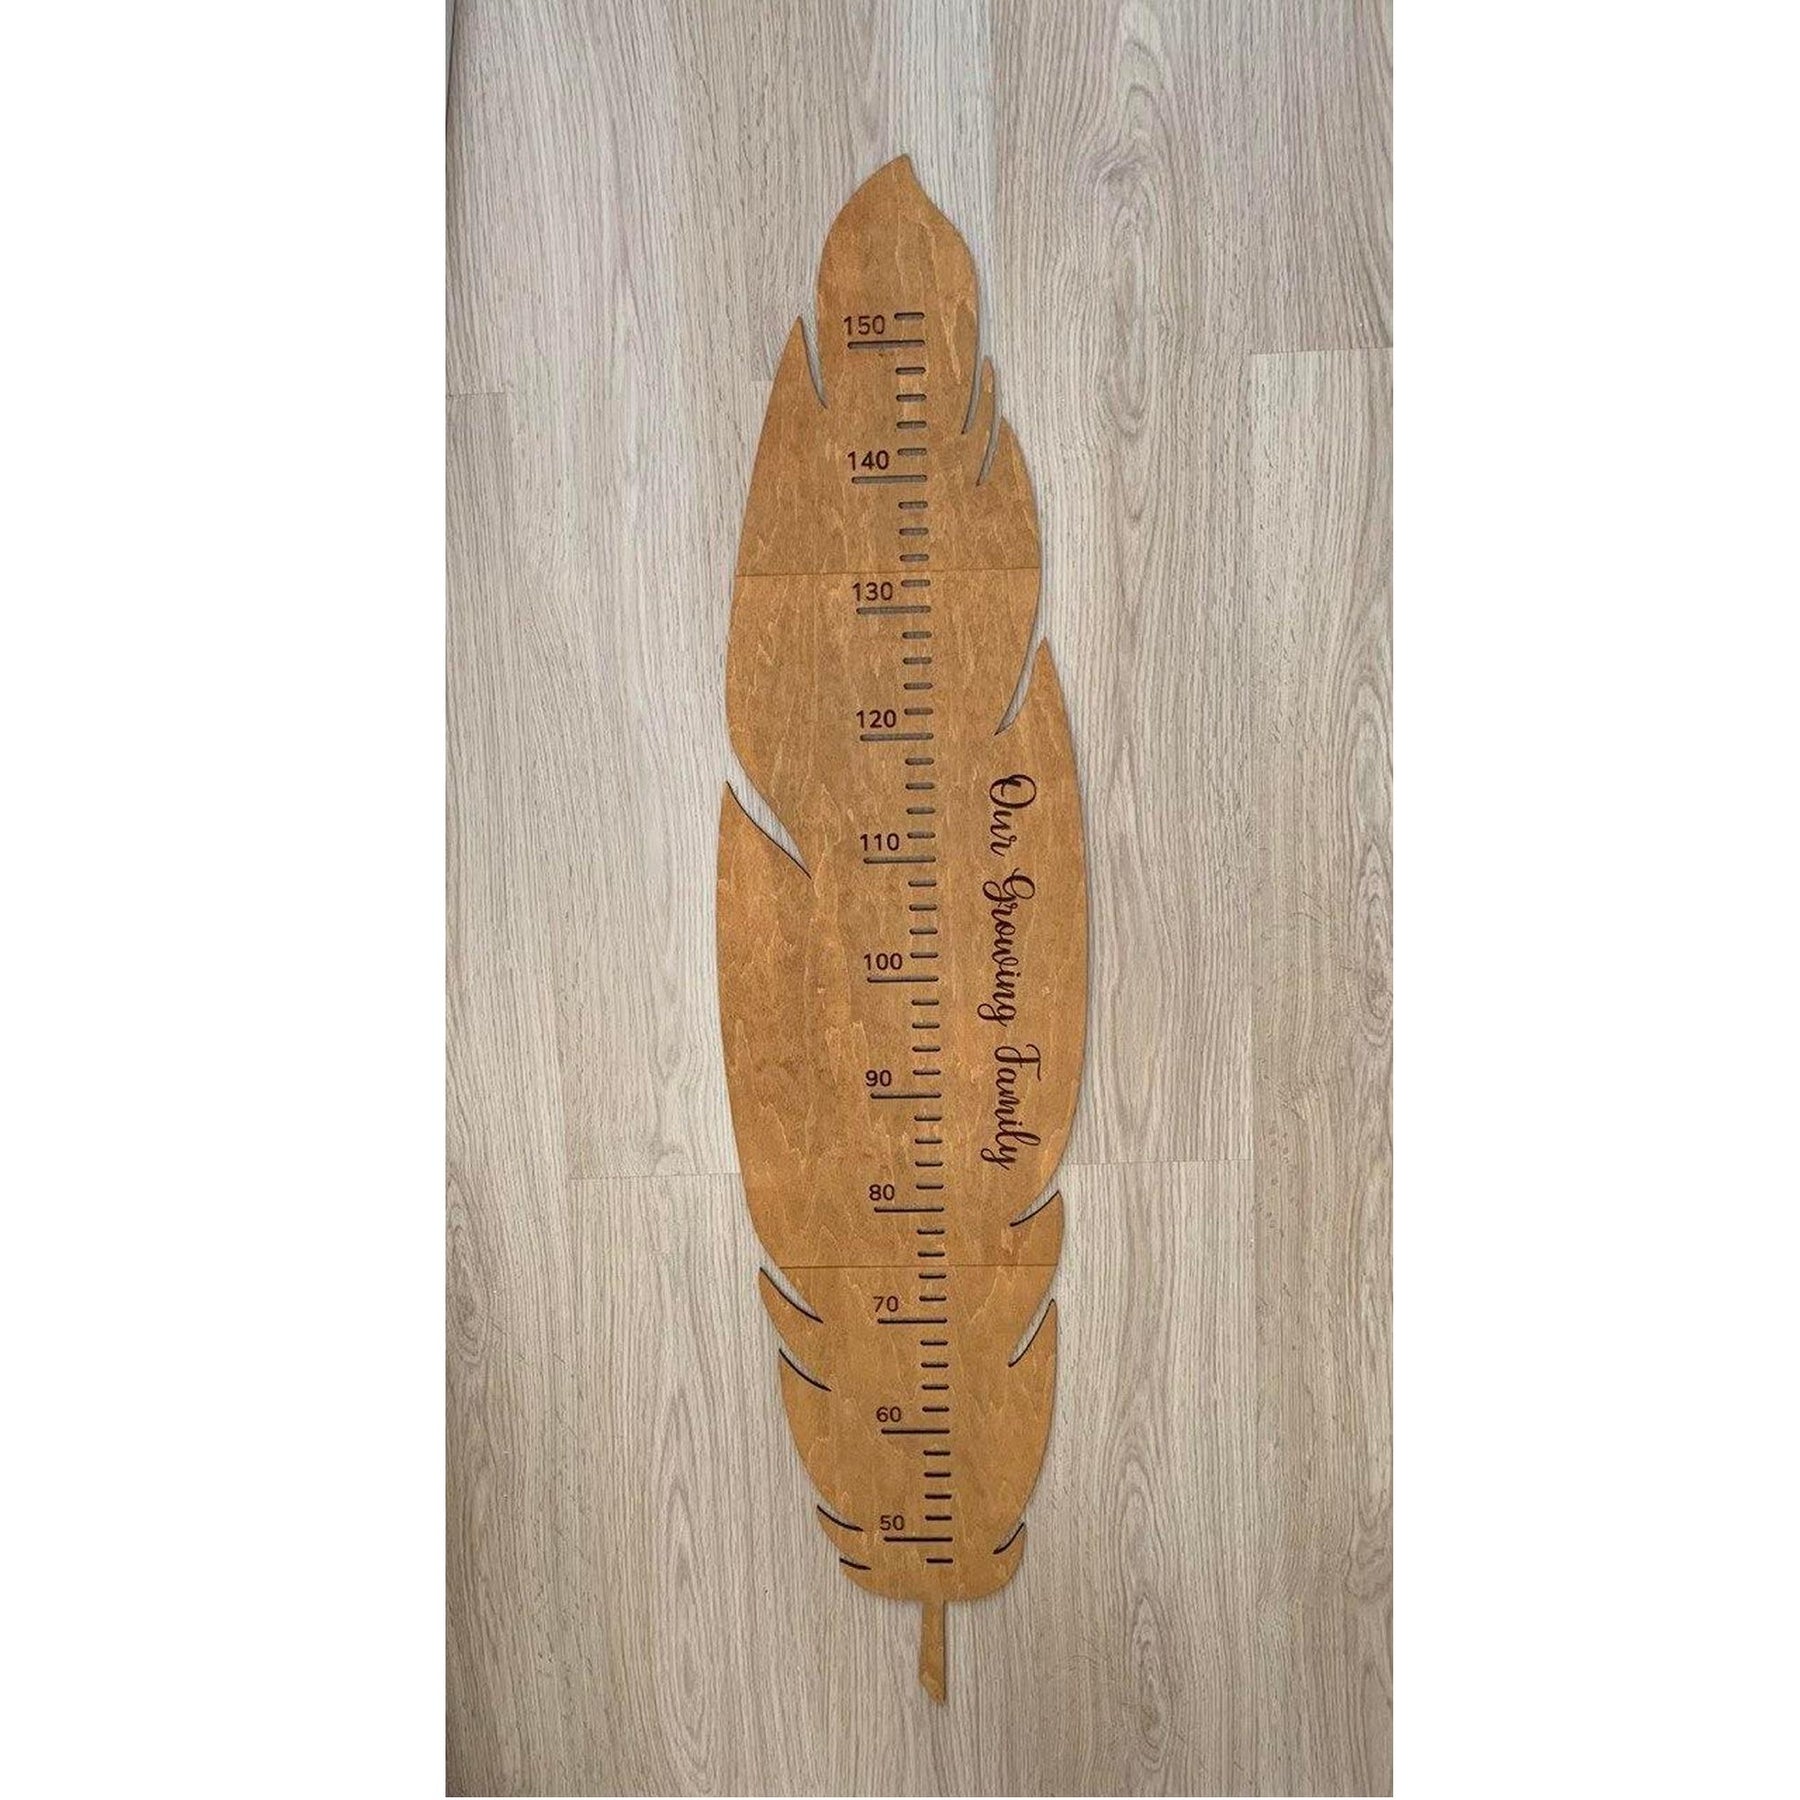 Wooden Feather Shaped Growth Chart